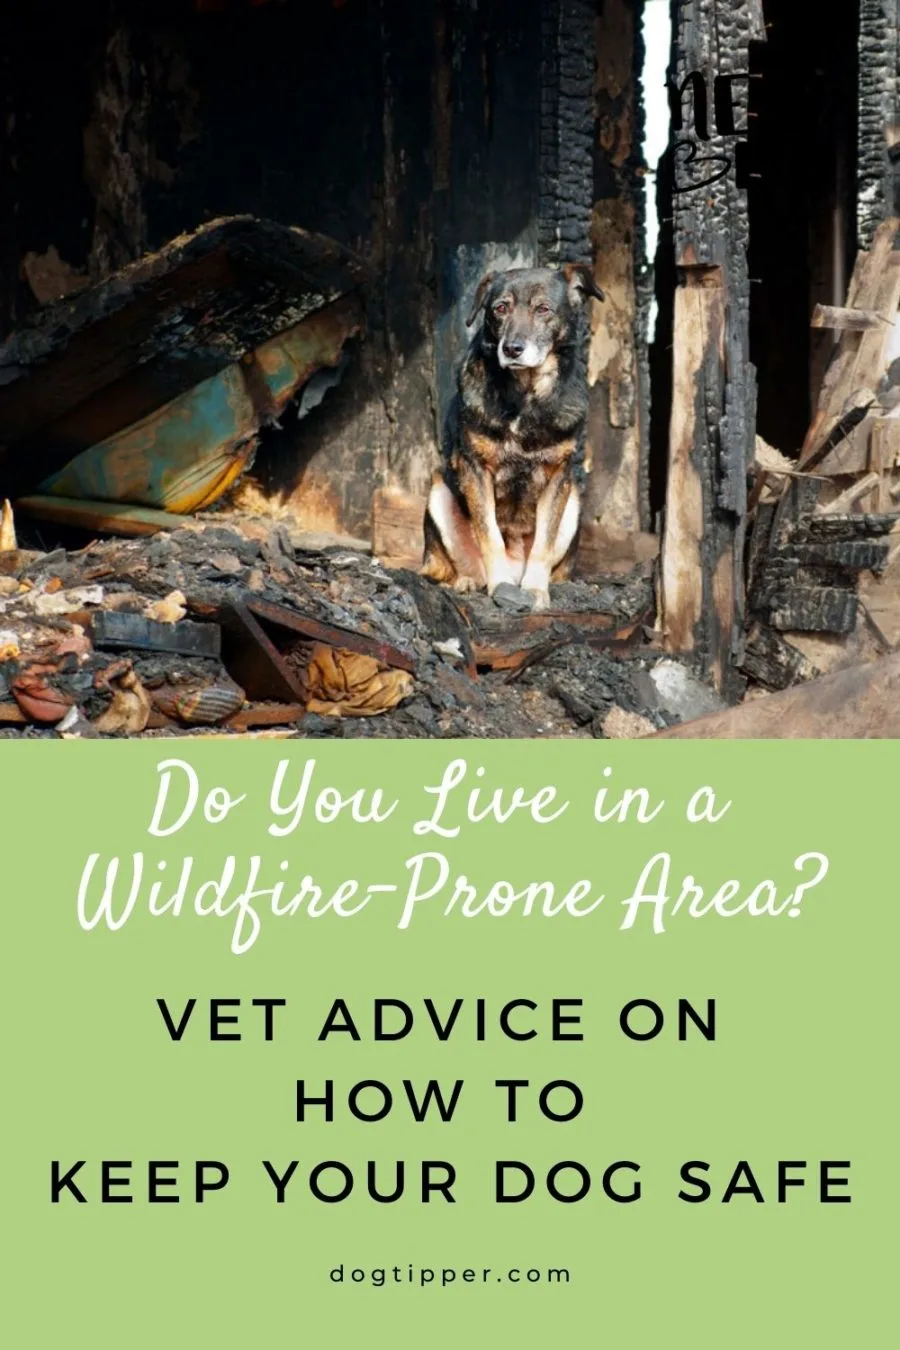 vet advice on how to keep your dog safe when wildfires are in area